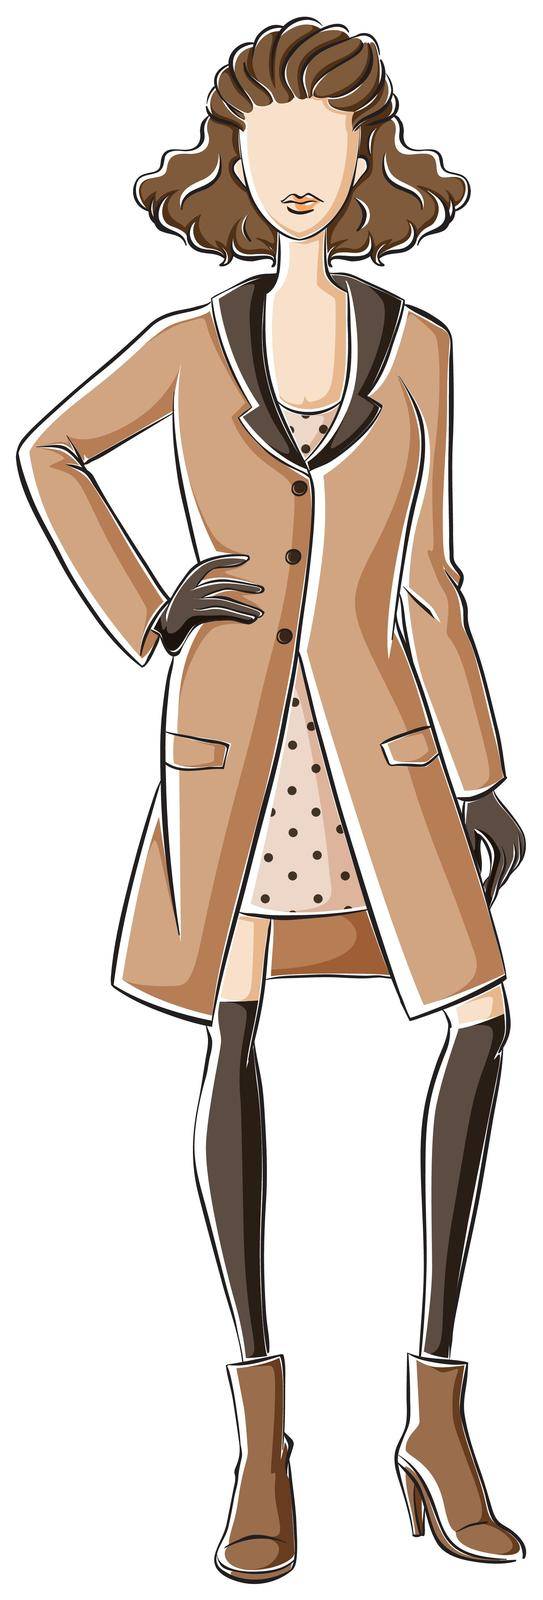 Sketch of a woman in brown color dress and overcoat